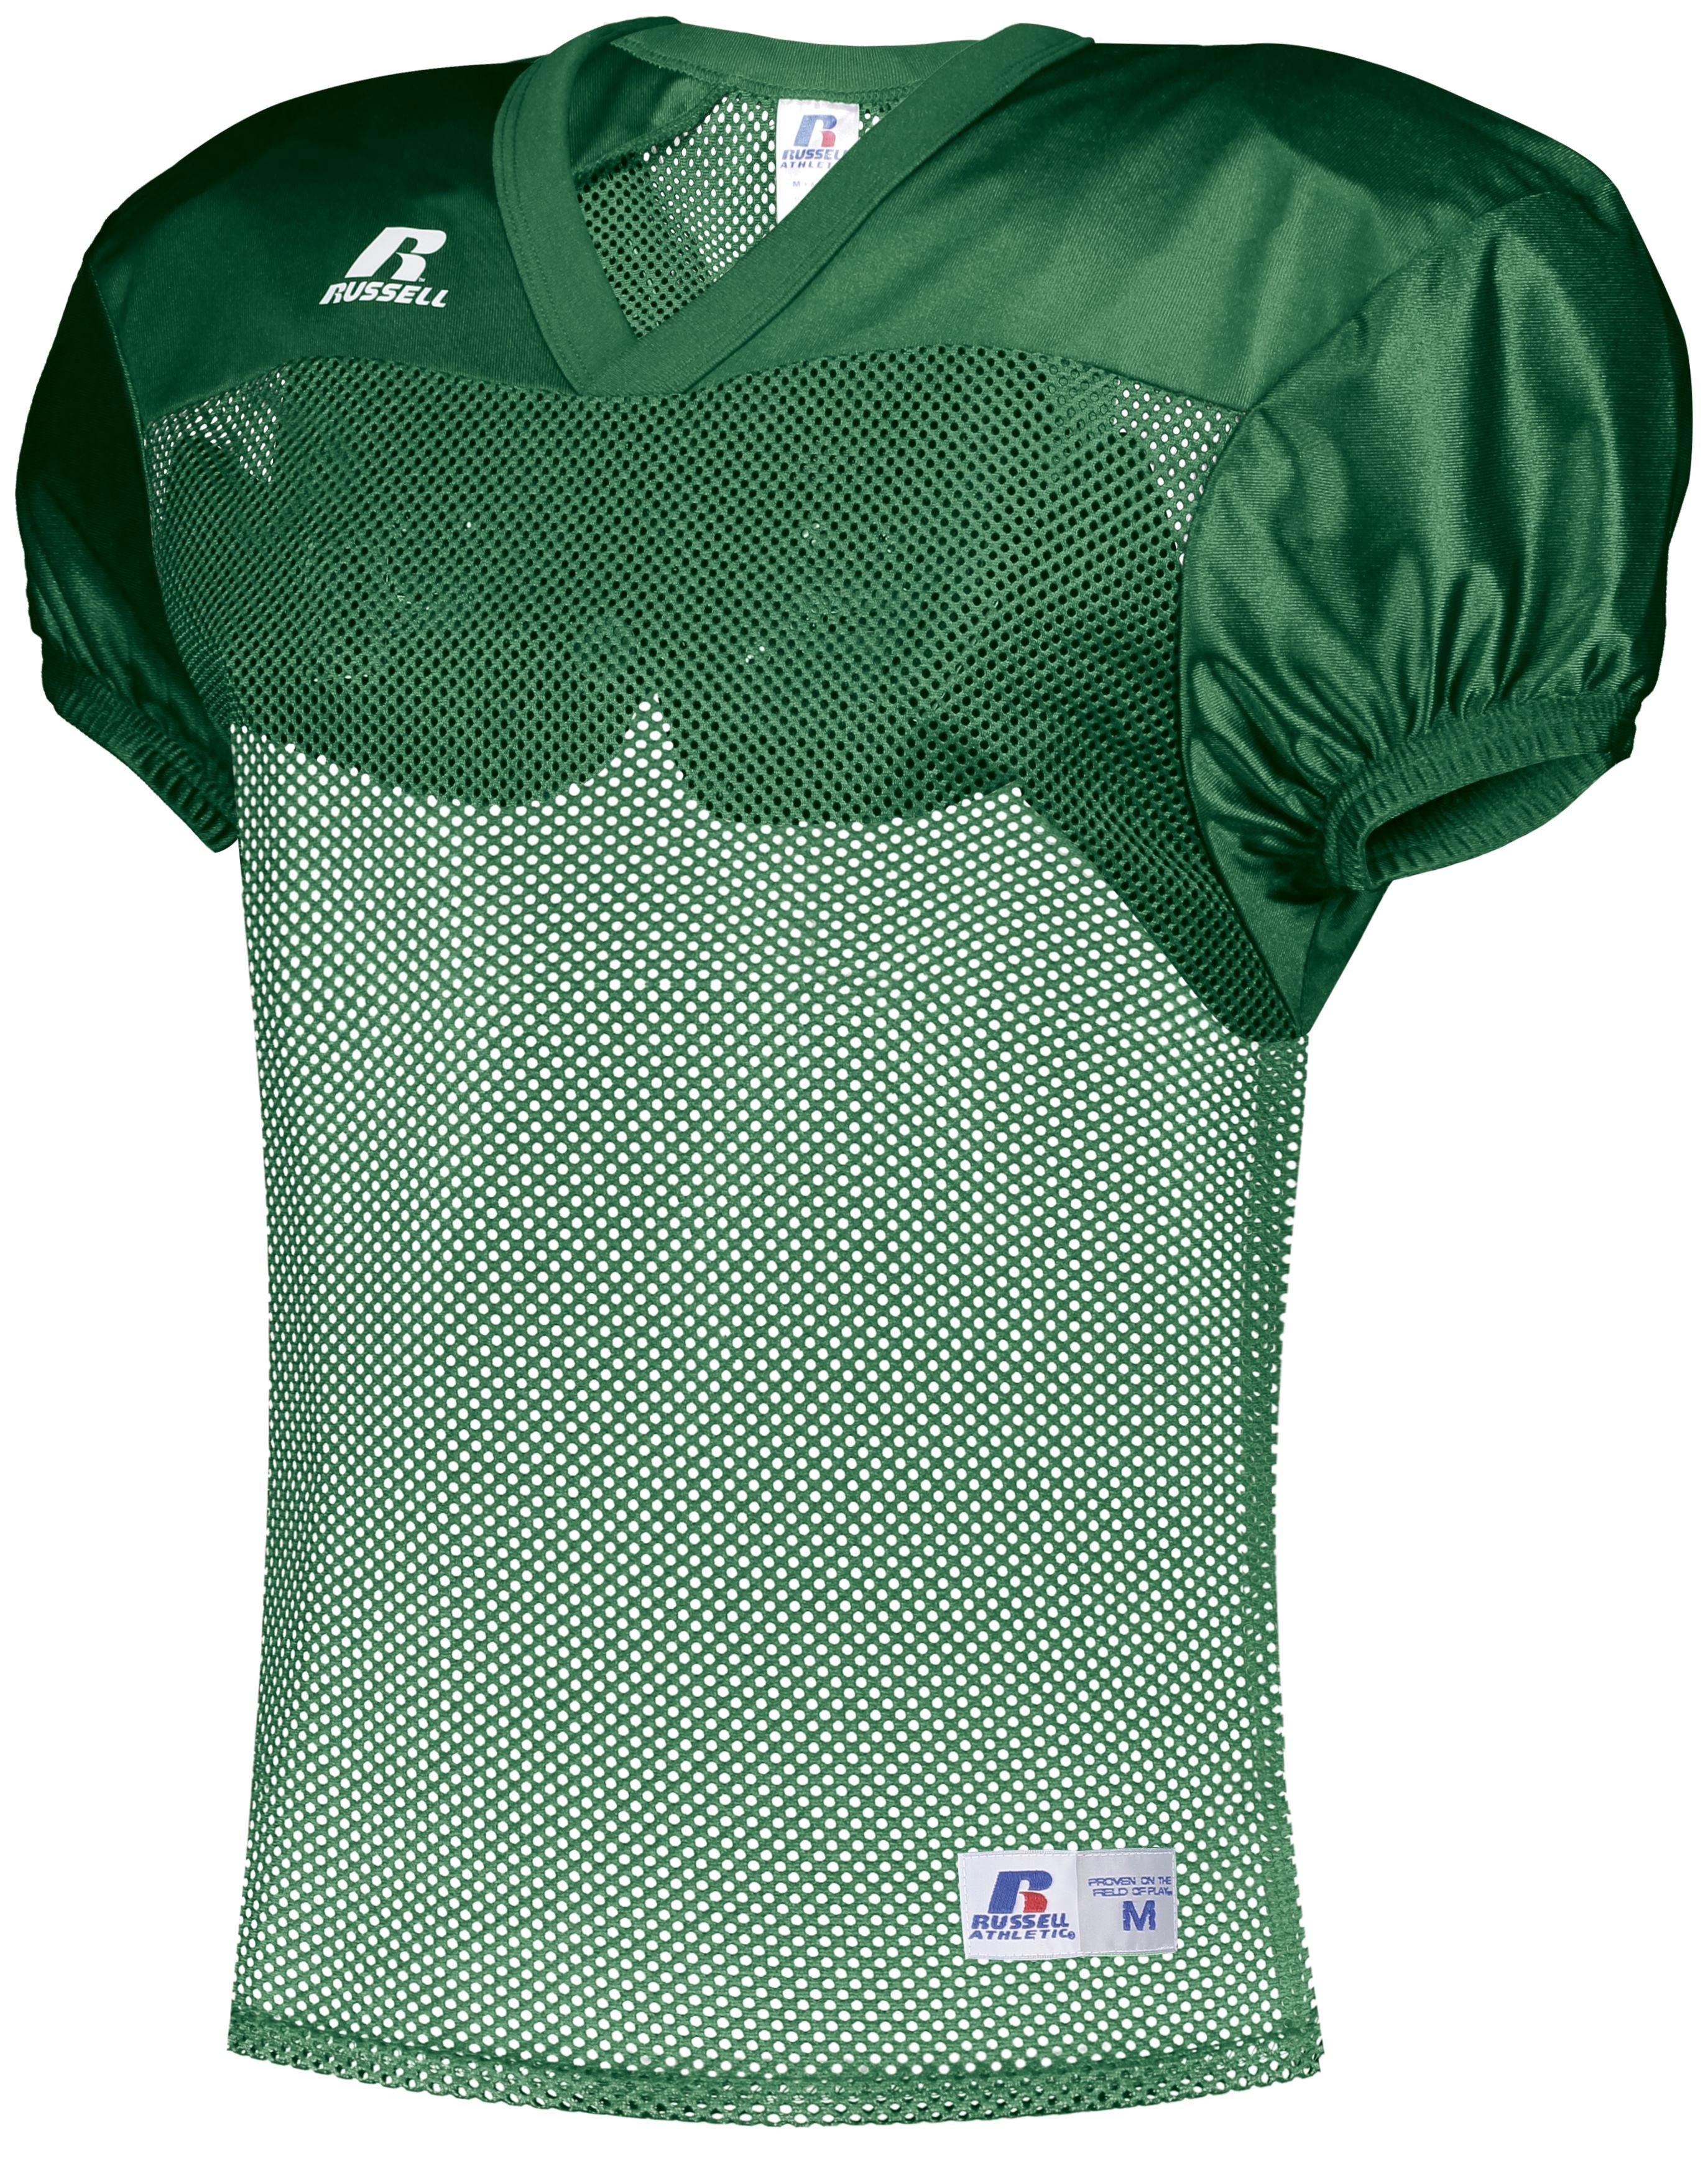 Russell Athletic Stock Practice Jersey in Kelly  -Part of the Adult, Adult-Jersey, Football, Russell-Athletic-Products, Shirts, All-Sports, All-Sports-1 product lines at KanaleyCreations.com